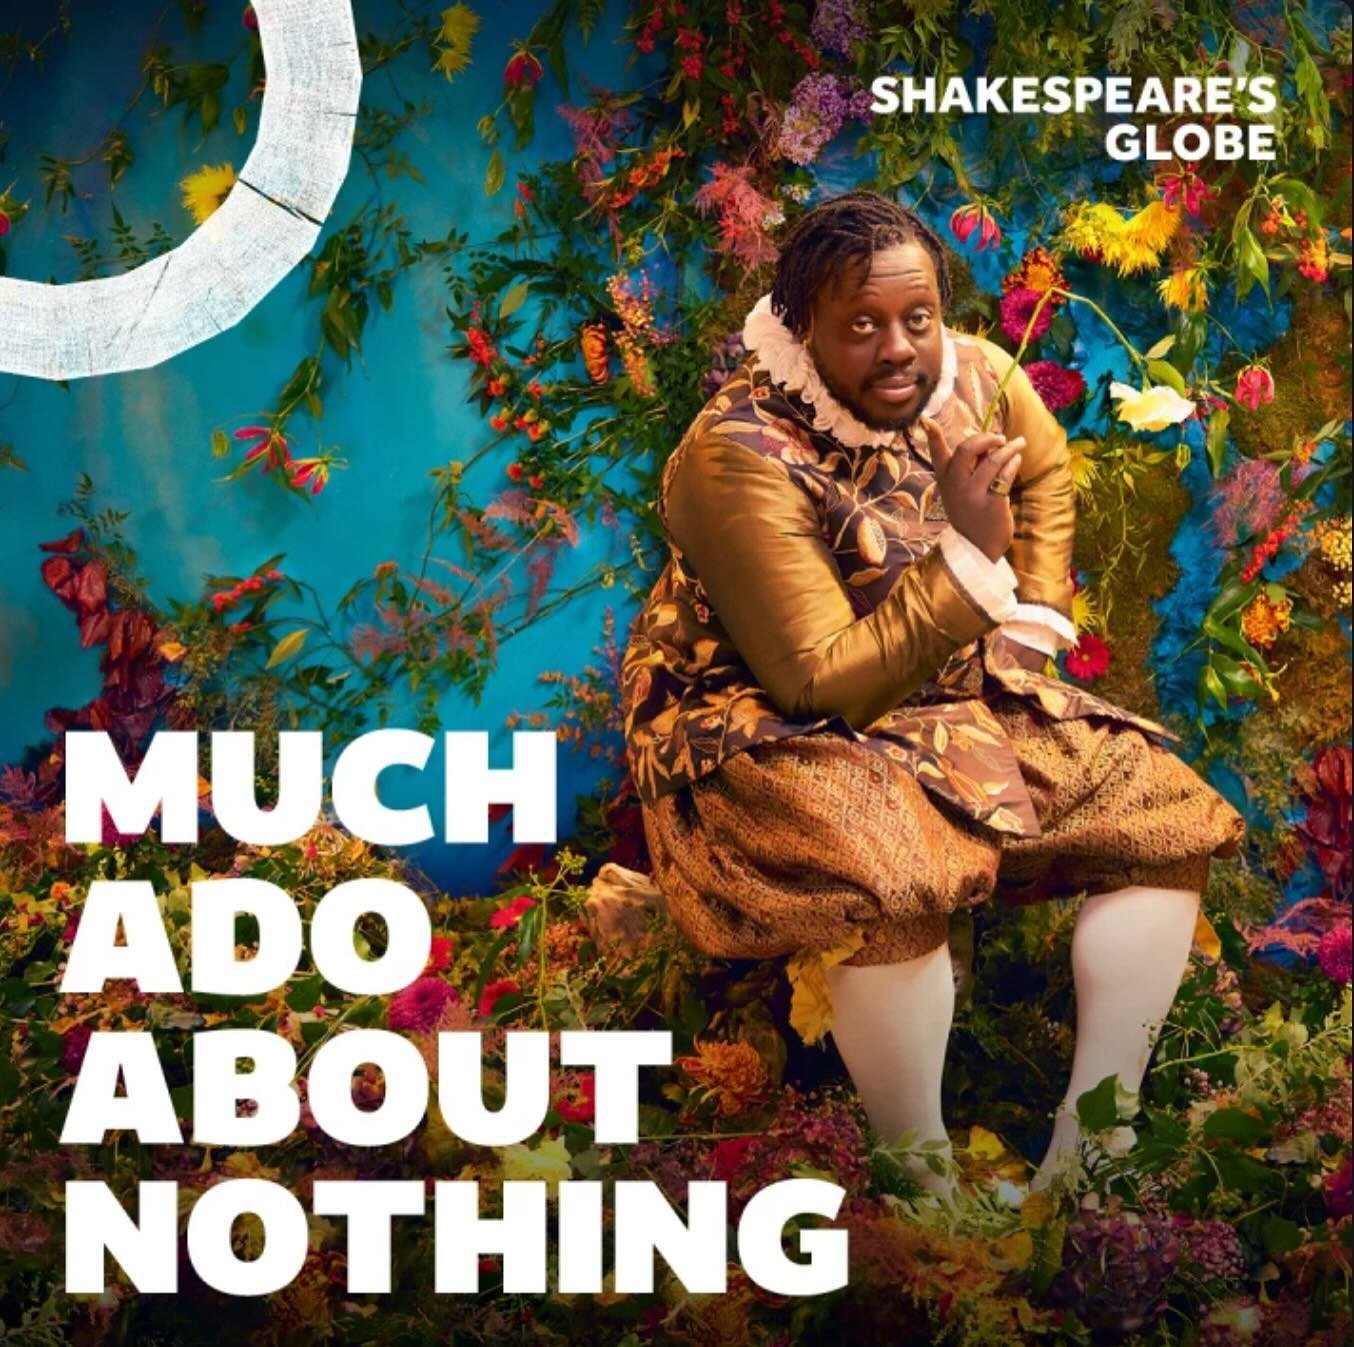 Now Playing: MUCH ADO ABOUT NOTHING @the_globe directed by Sean Holmes now through August 25th.

This play is featured in our new edition, available now! Head to @teachyourchildrenshakespeare on YouTube to listen to Ken Ludwig play Benedict, check ou